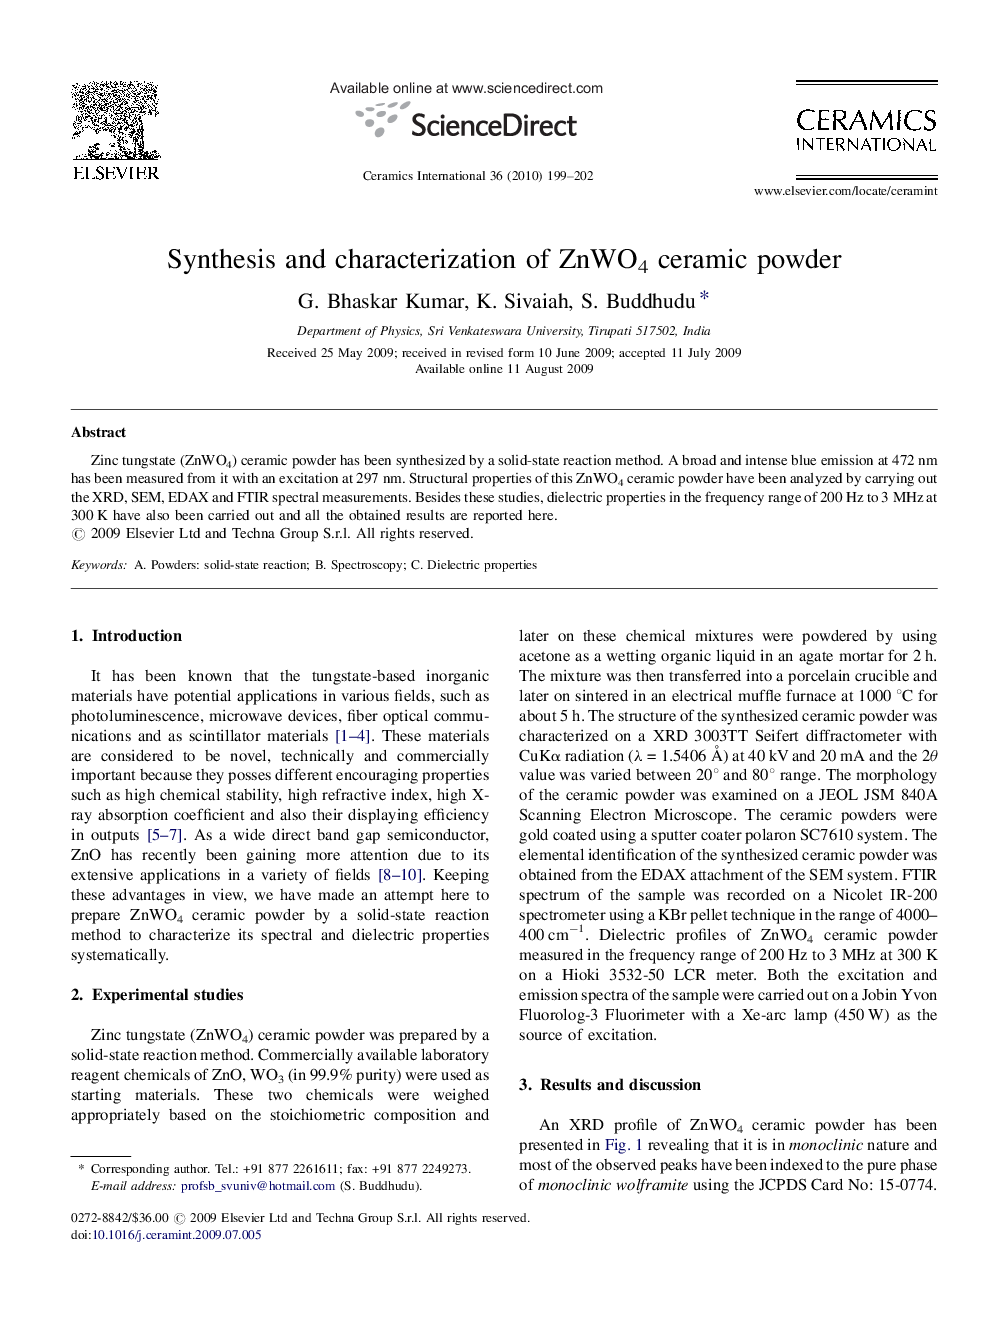 Synthesis and characterization of ZnWO4 ceramic powder